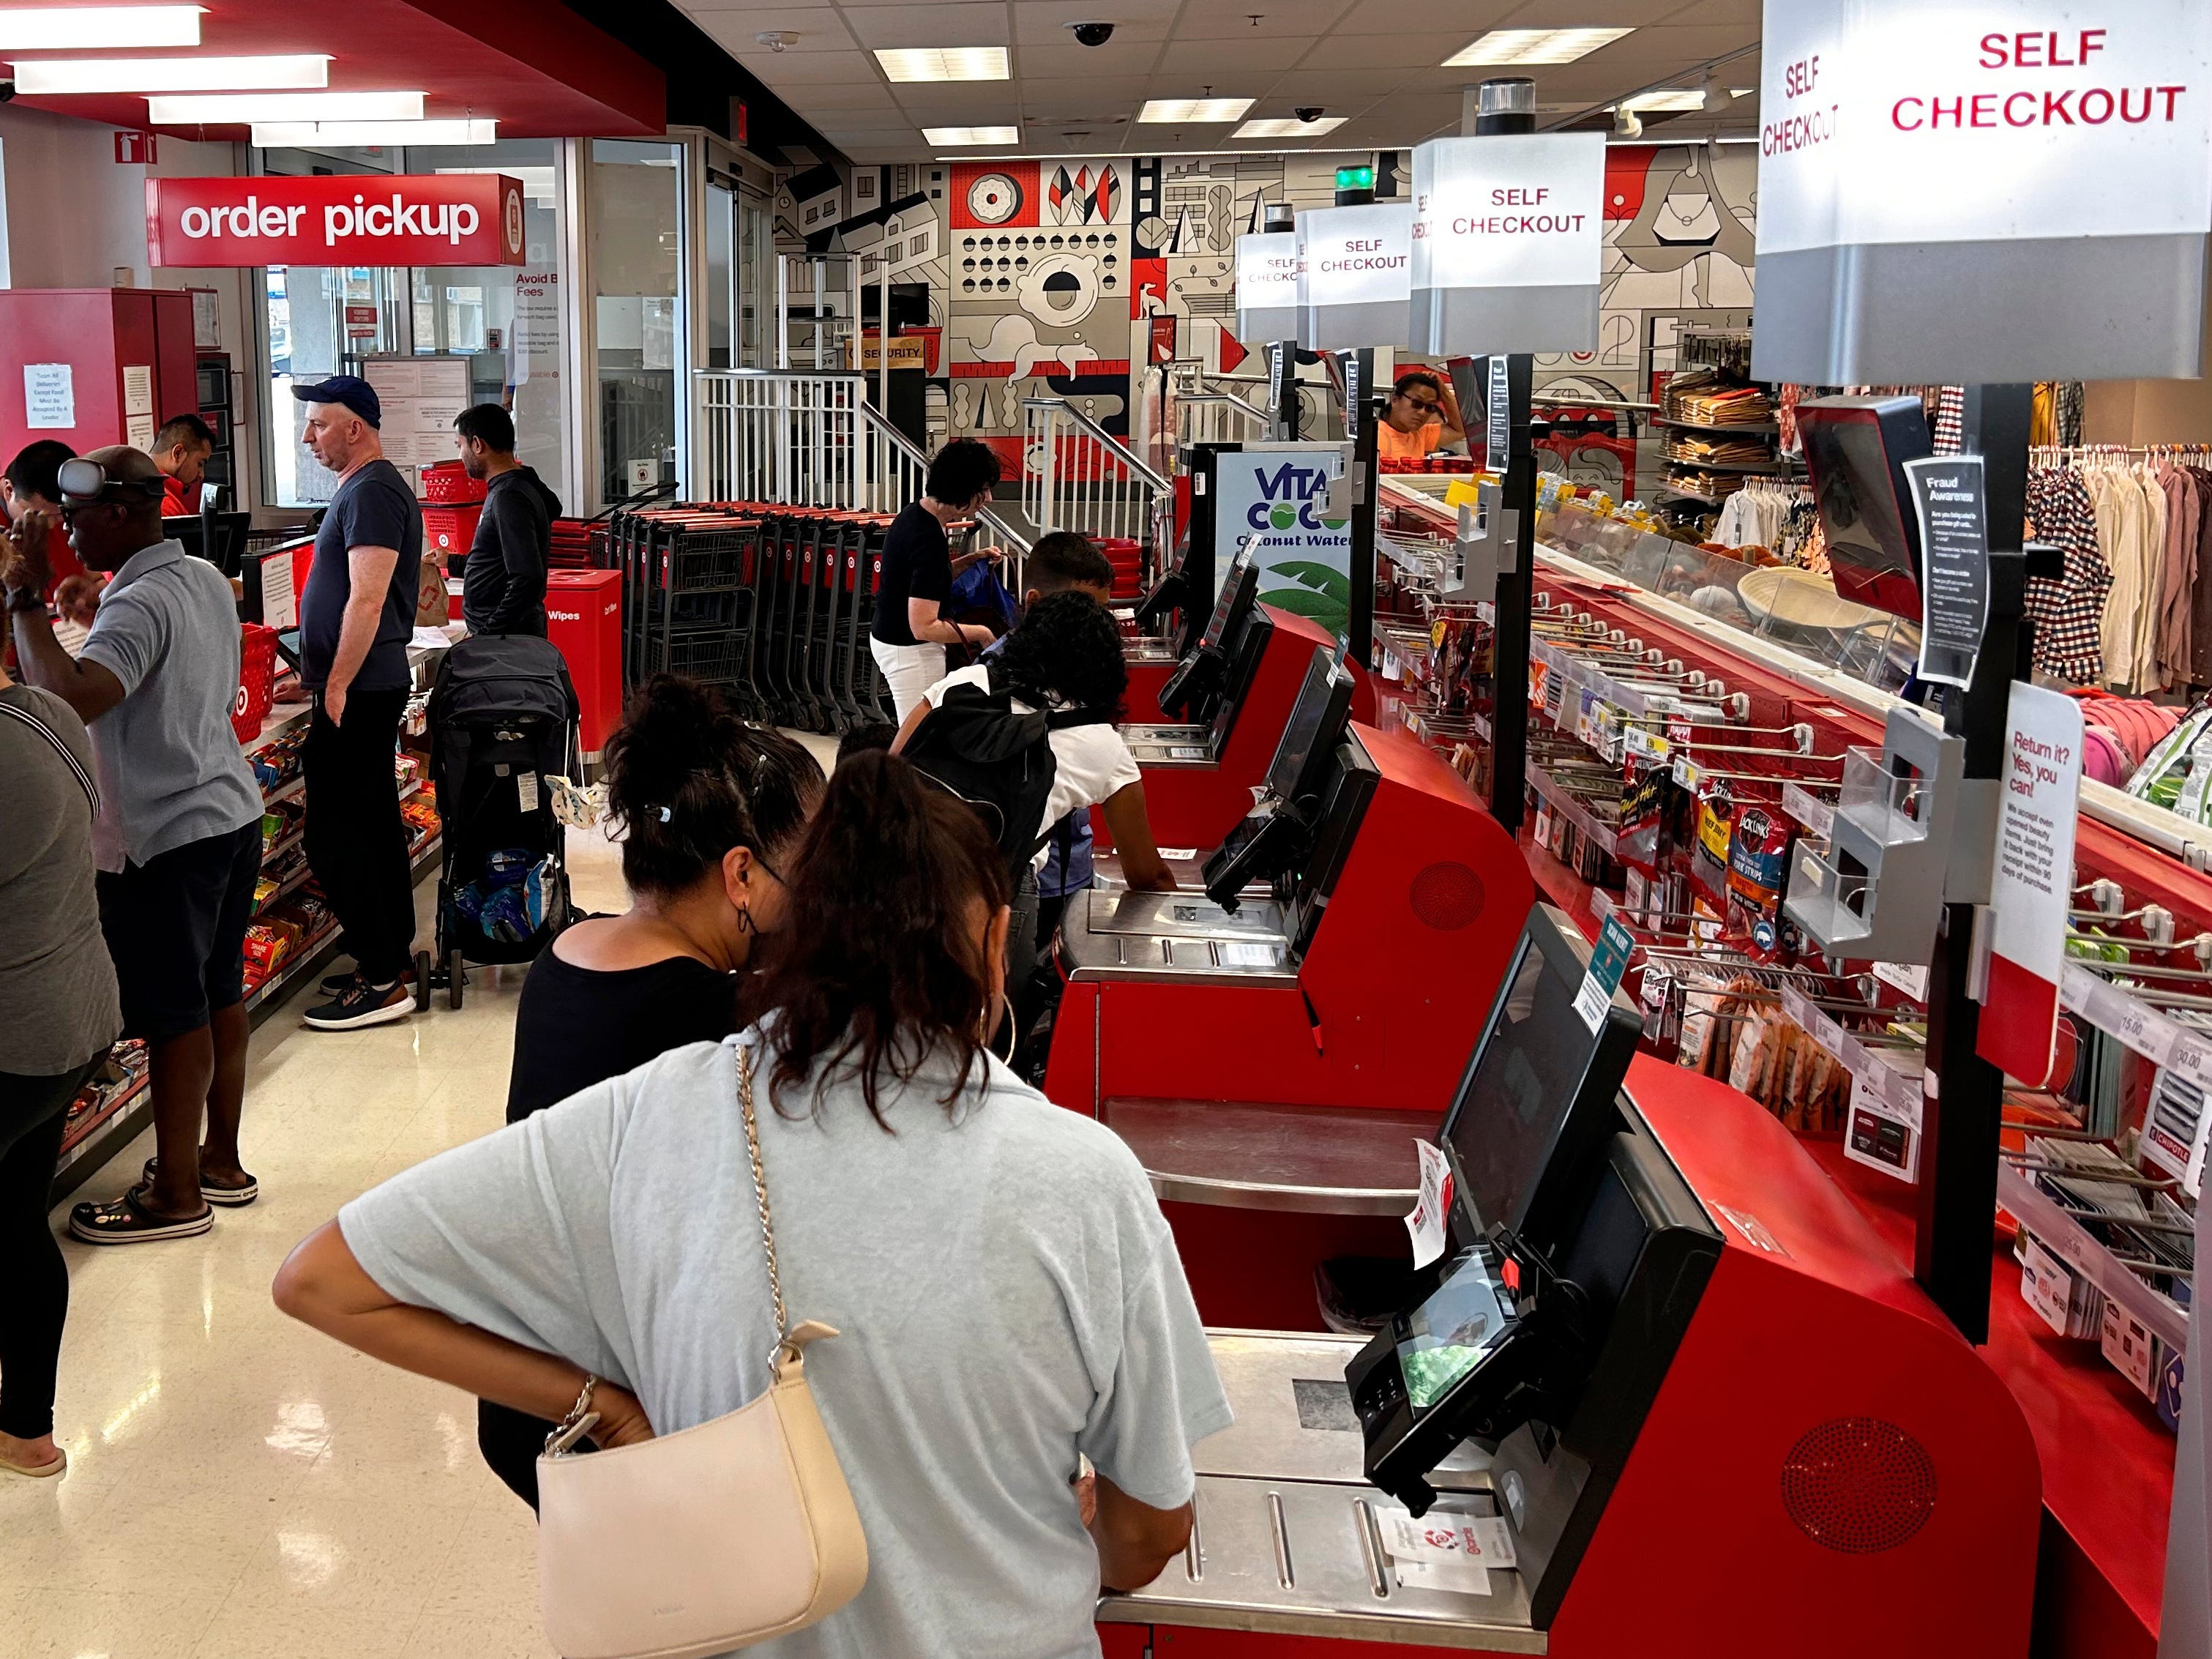 target is limiting self-checkout hours in some stores as the retailer continues to battle missing inventory